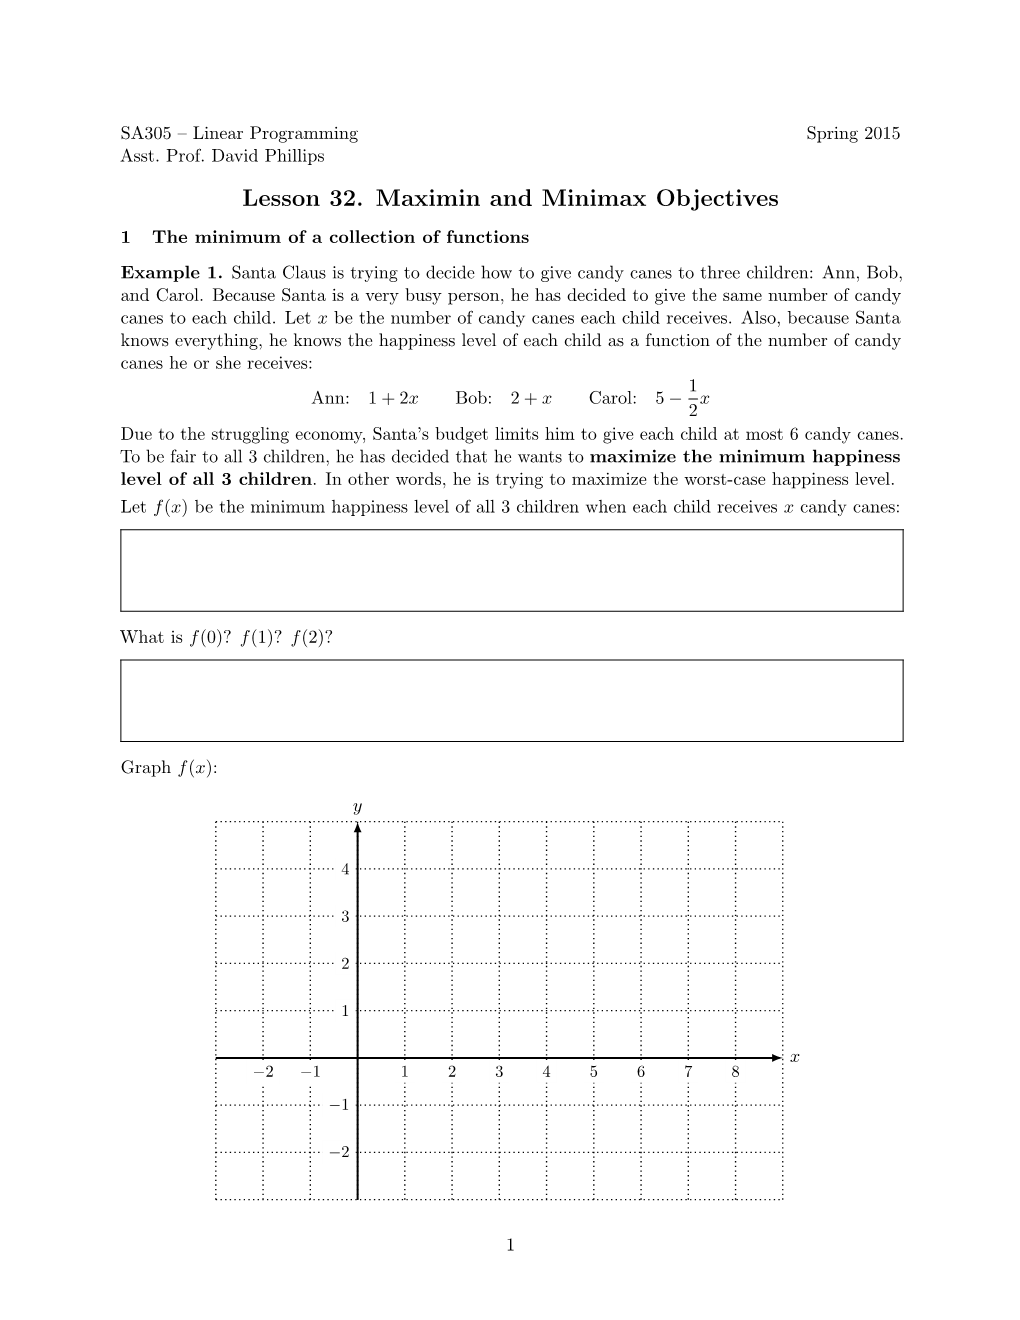 Lesson 32. Maximin and Minimax Objectives 1 the Minimum of a Collection of Functions Example 1